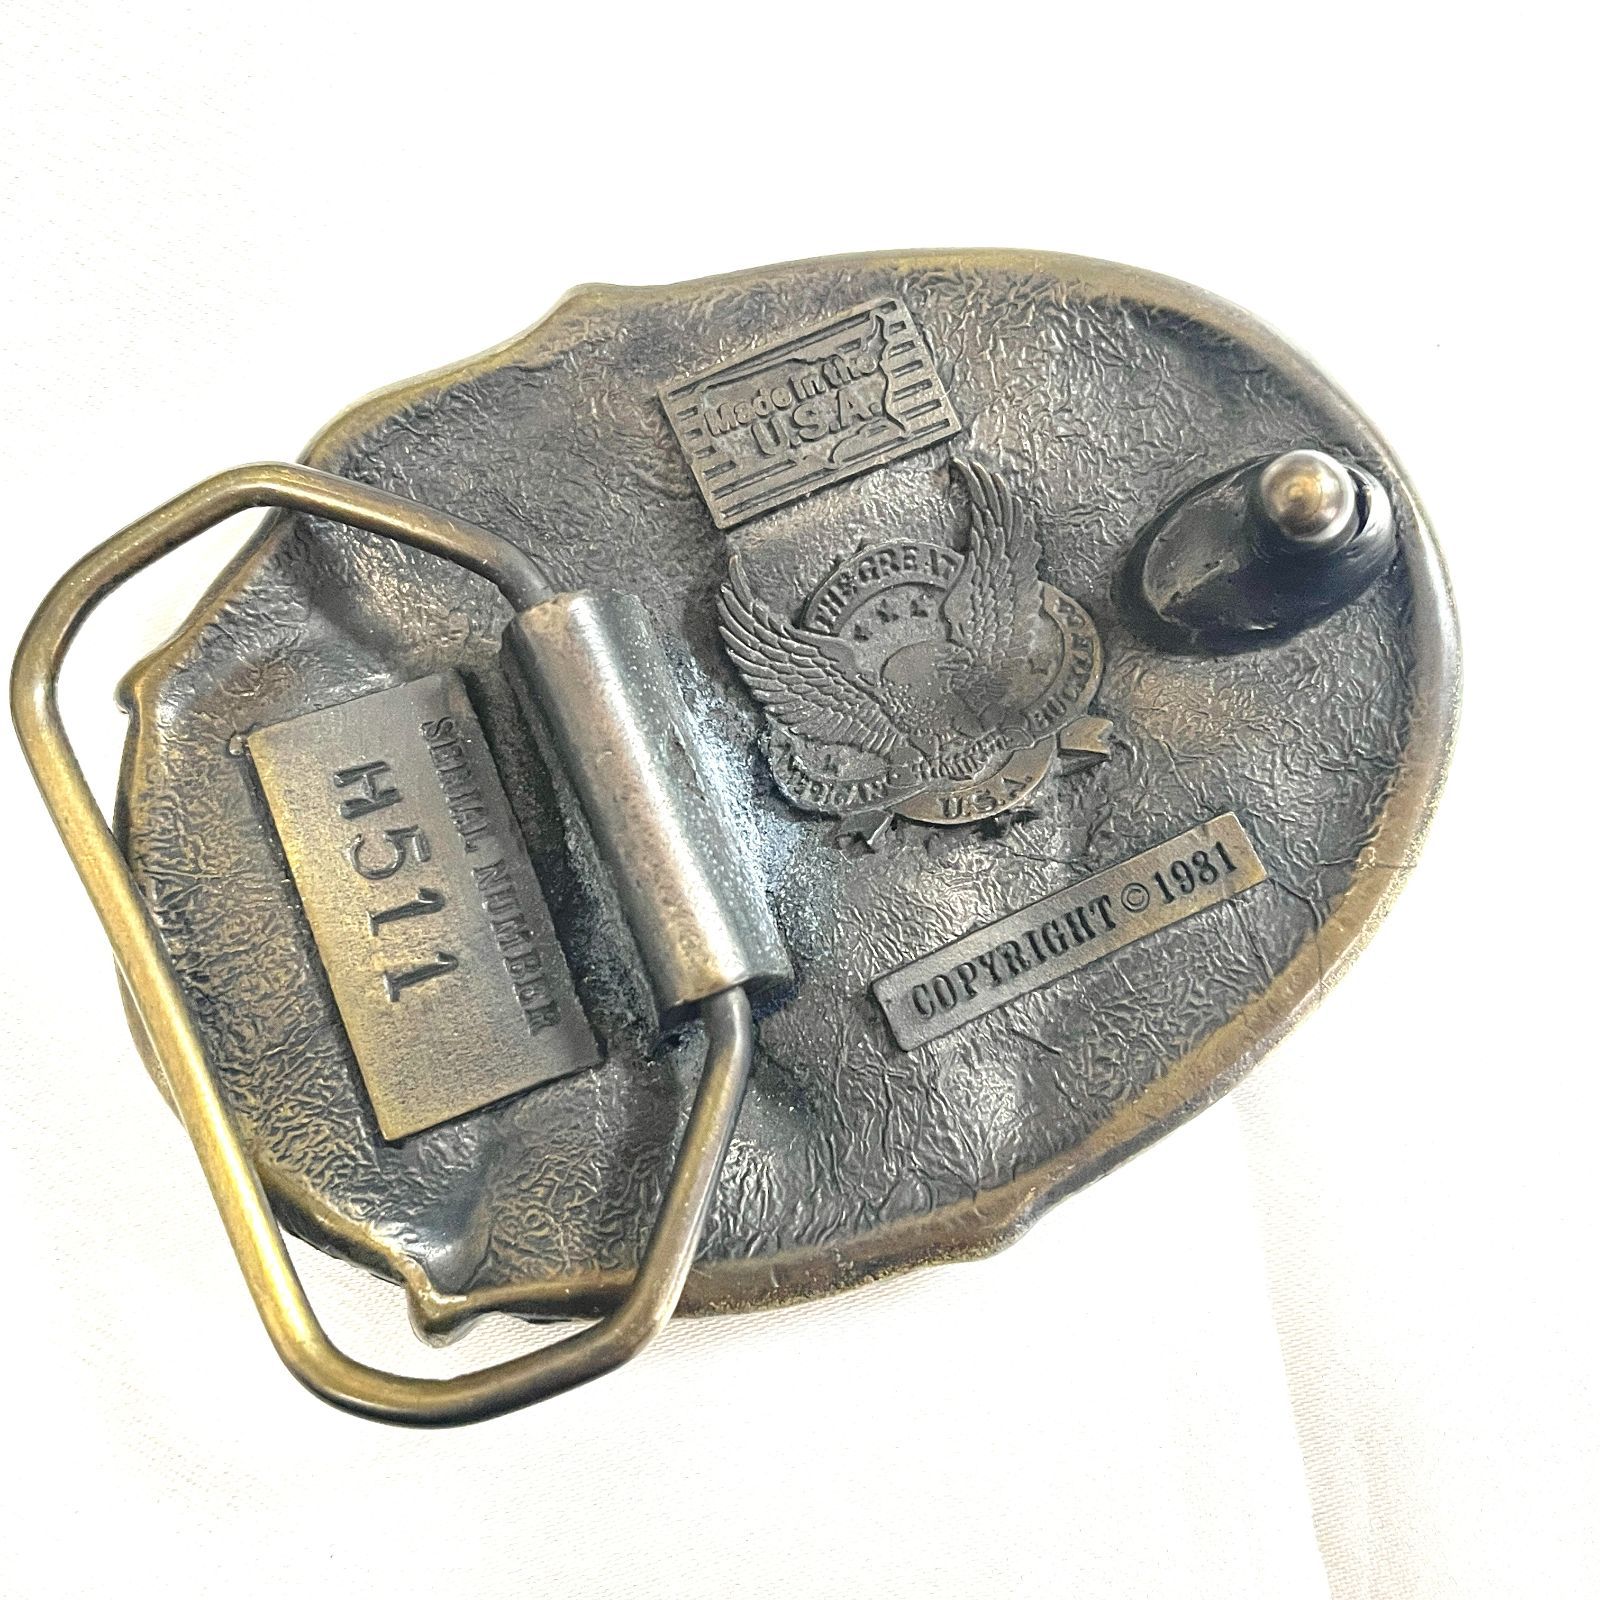 THE GREAT AMERICAN BUCKLE CO. Made in the U.S.A ヴィンテージ 